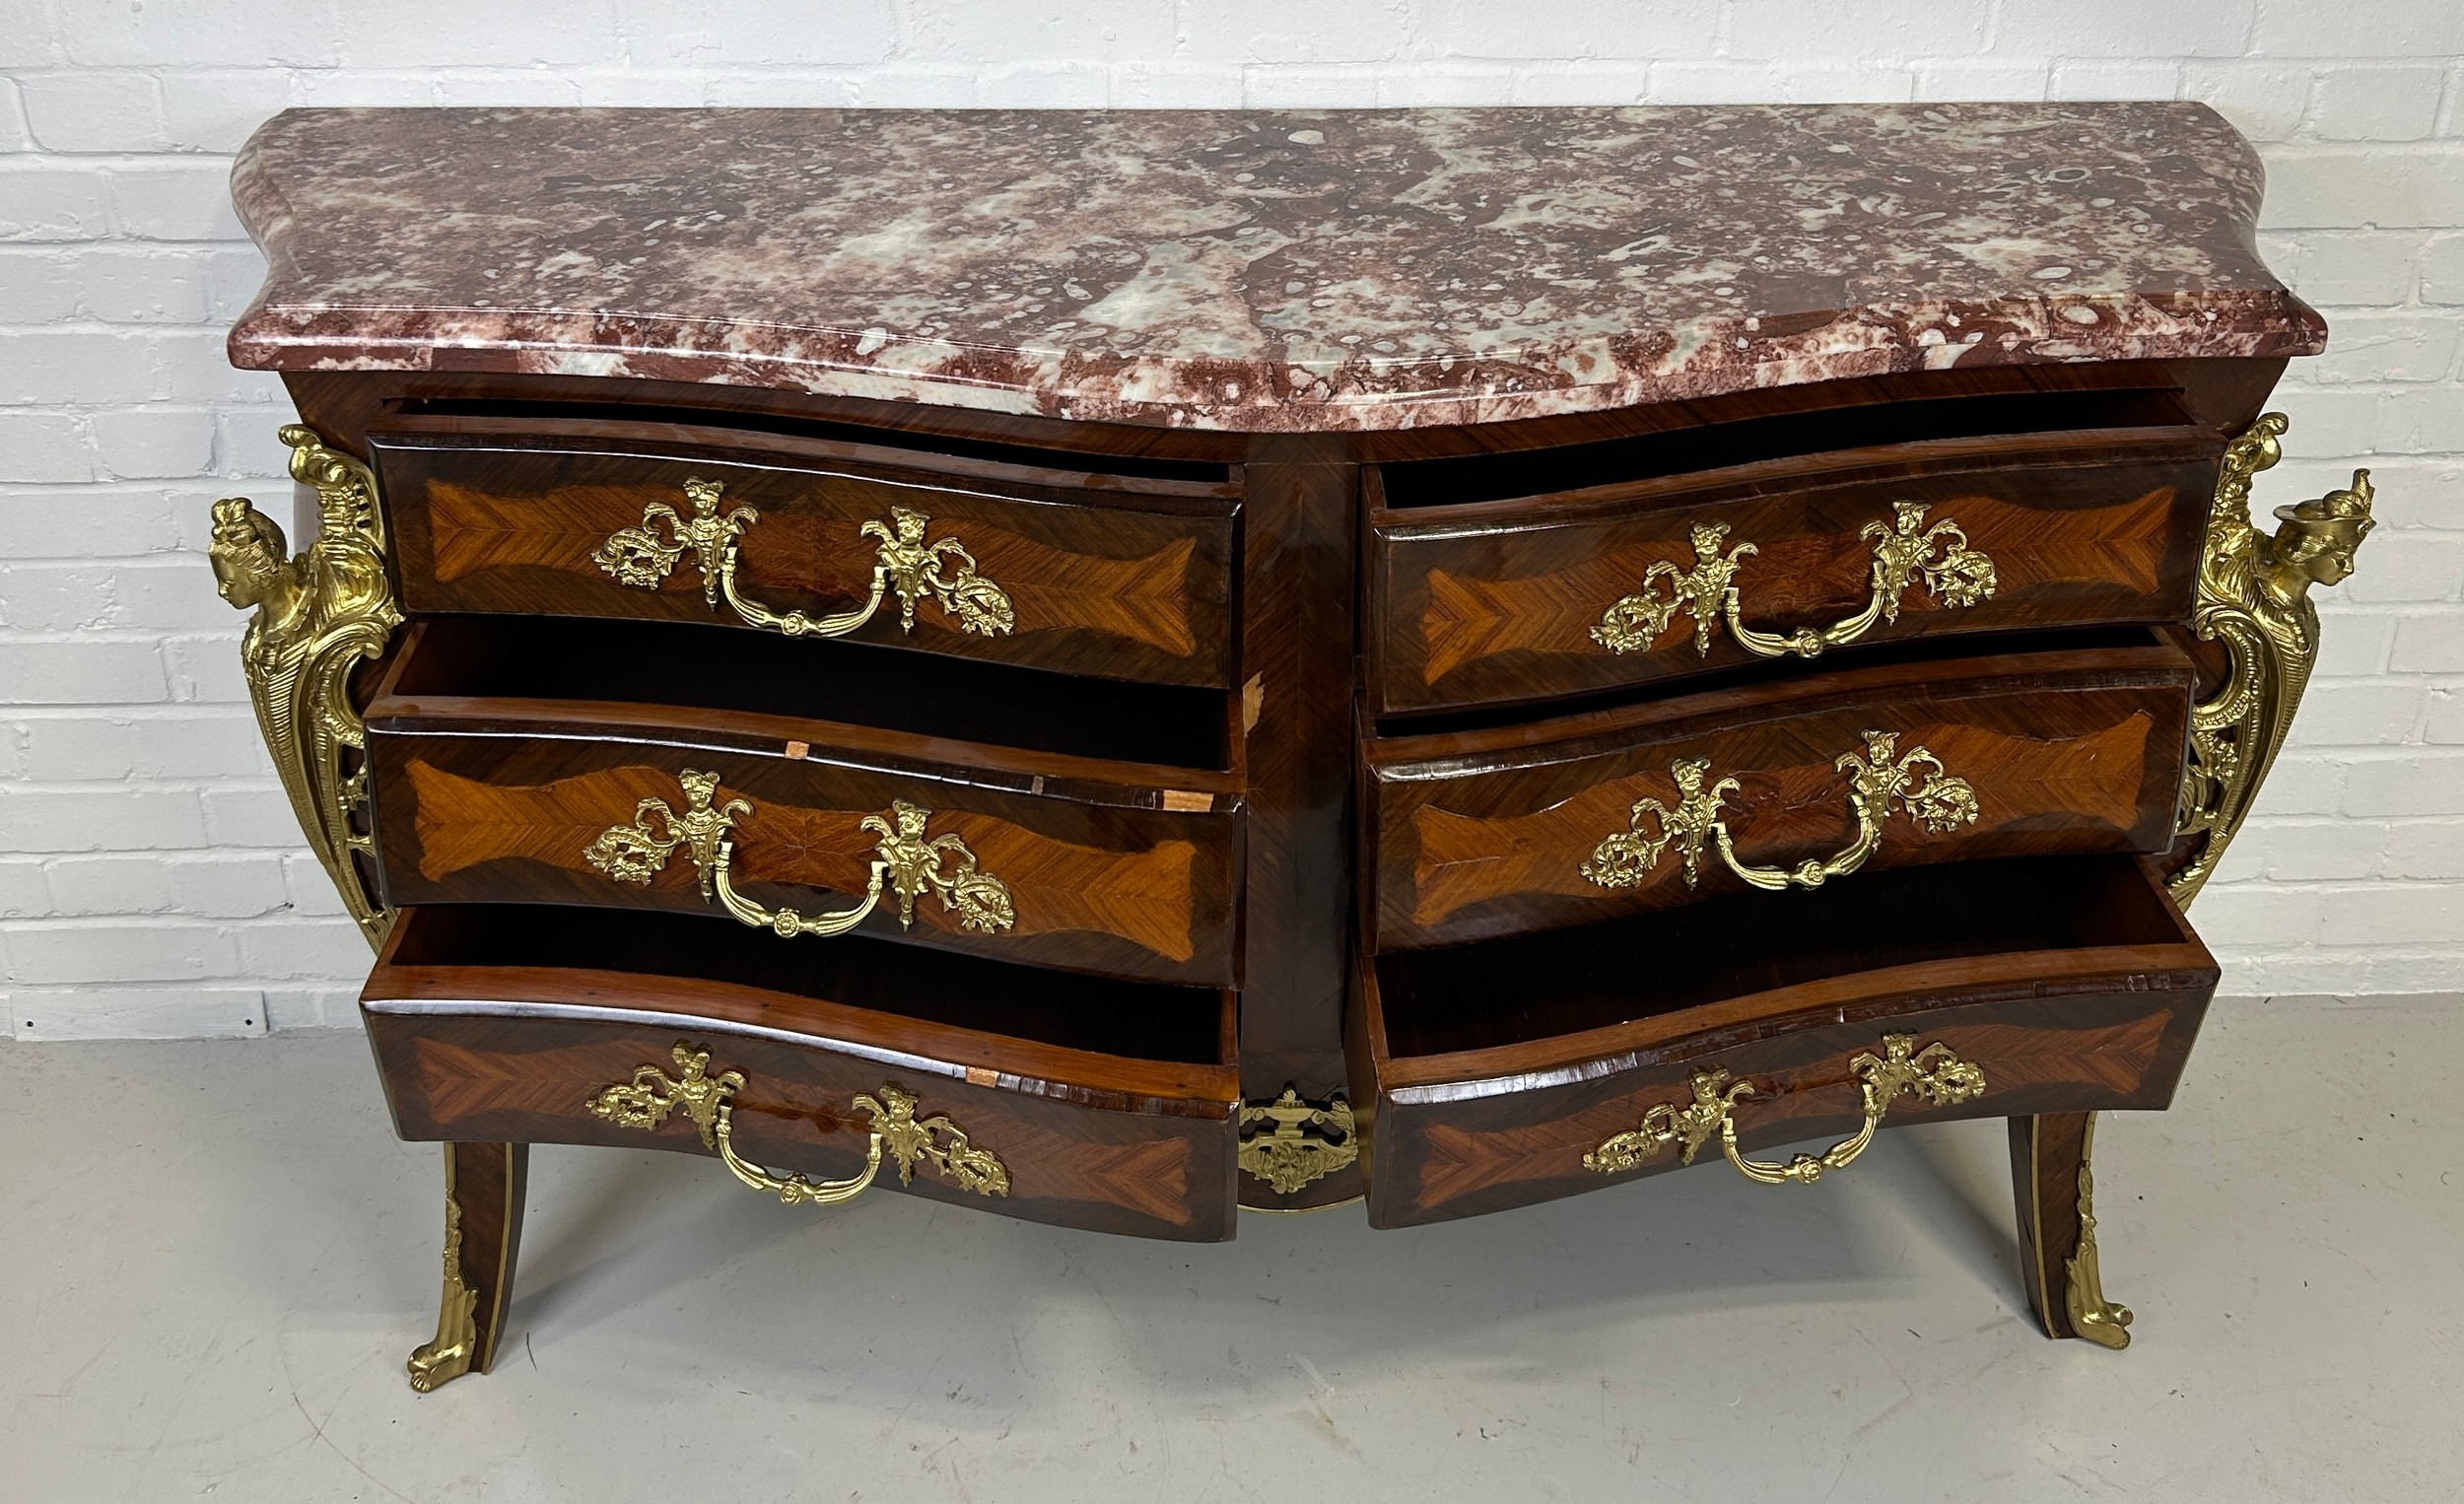 A LARGE LOUIS XVI STYLE BOMBE COMMODE WITH GILT BRONZE MOUNTS, 167cm x 95cm x 58cm - Image 9 of 9